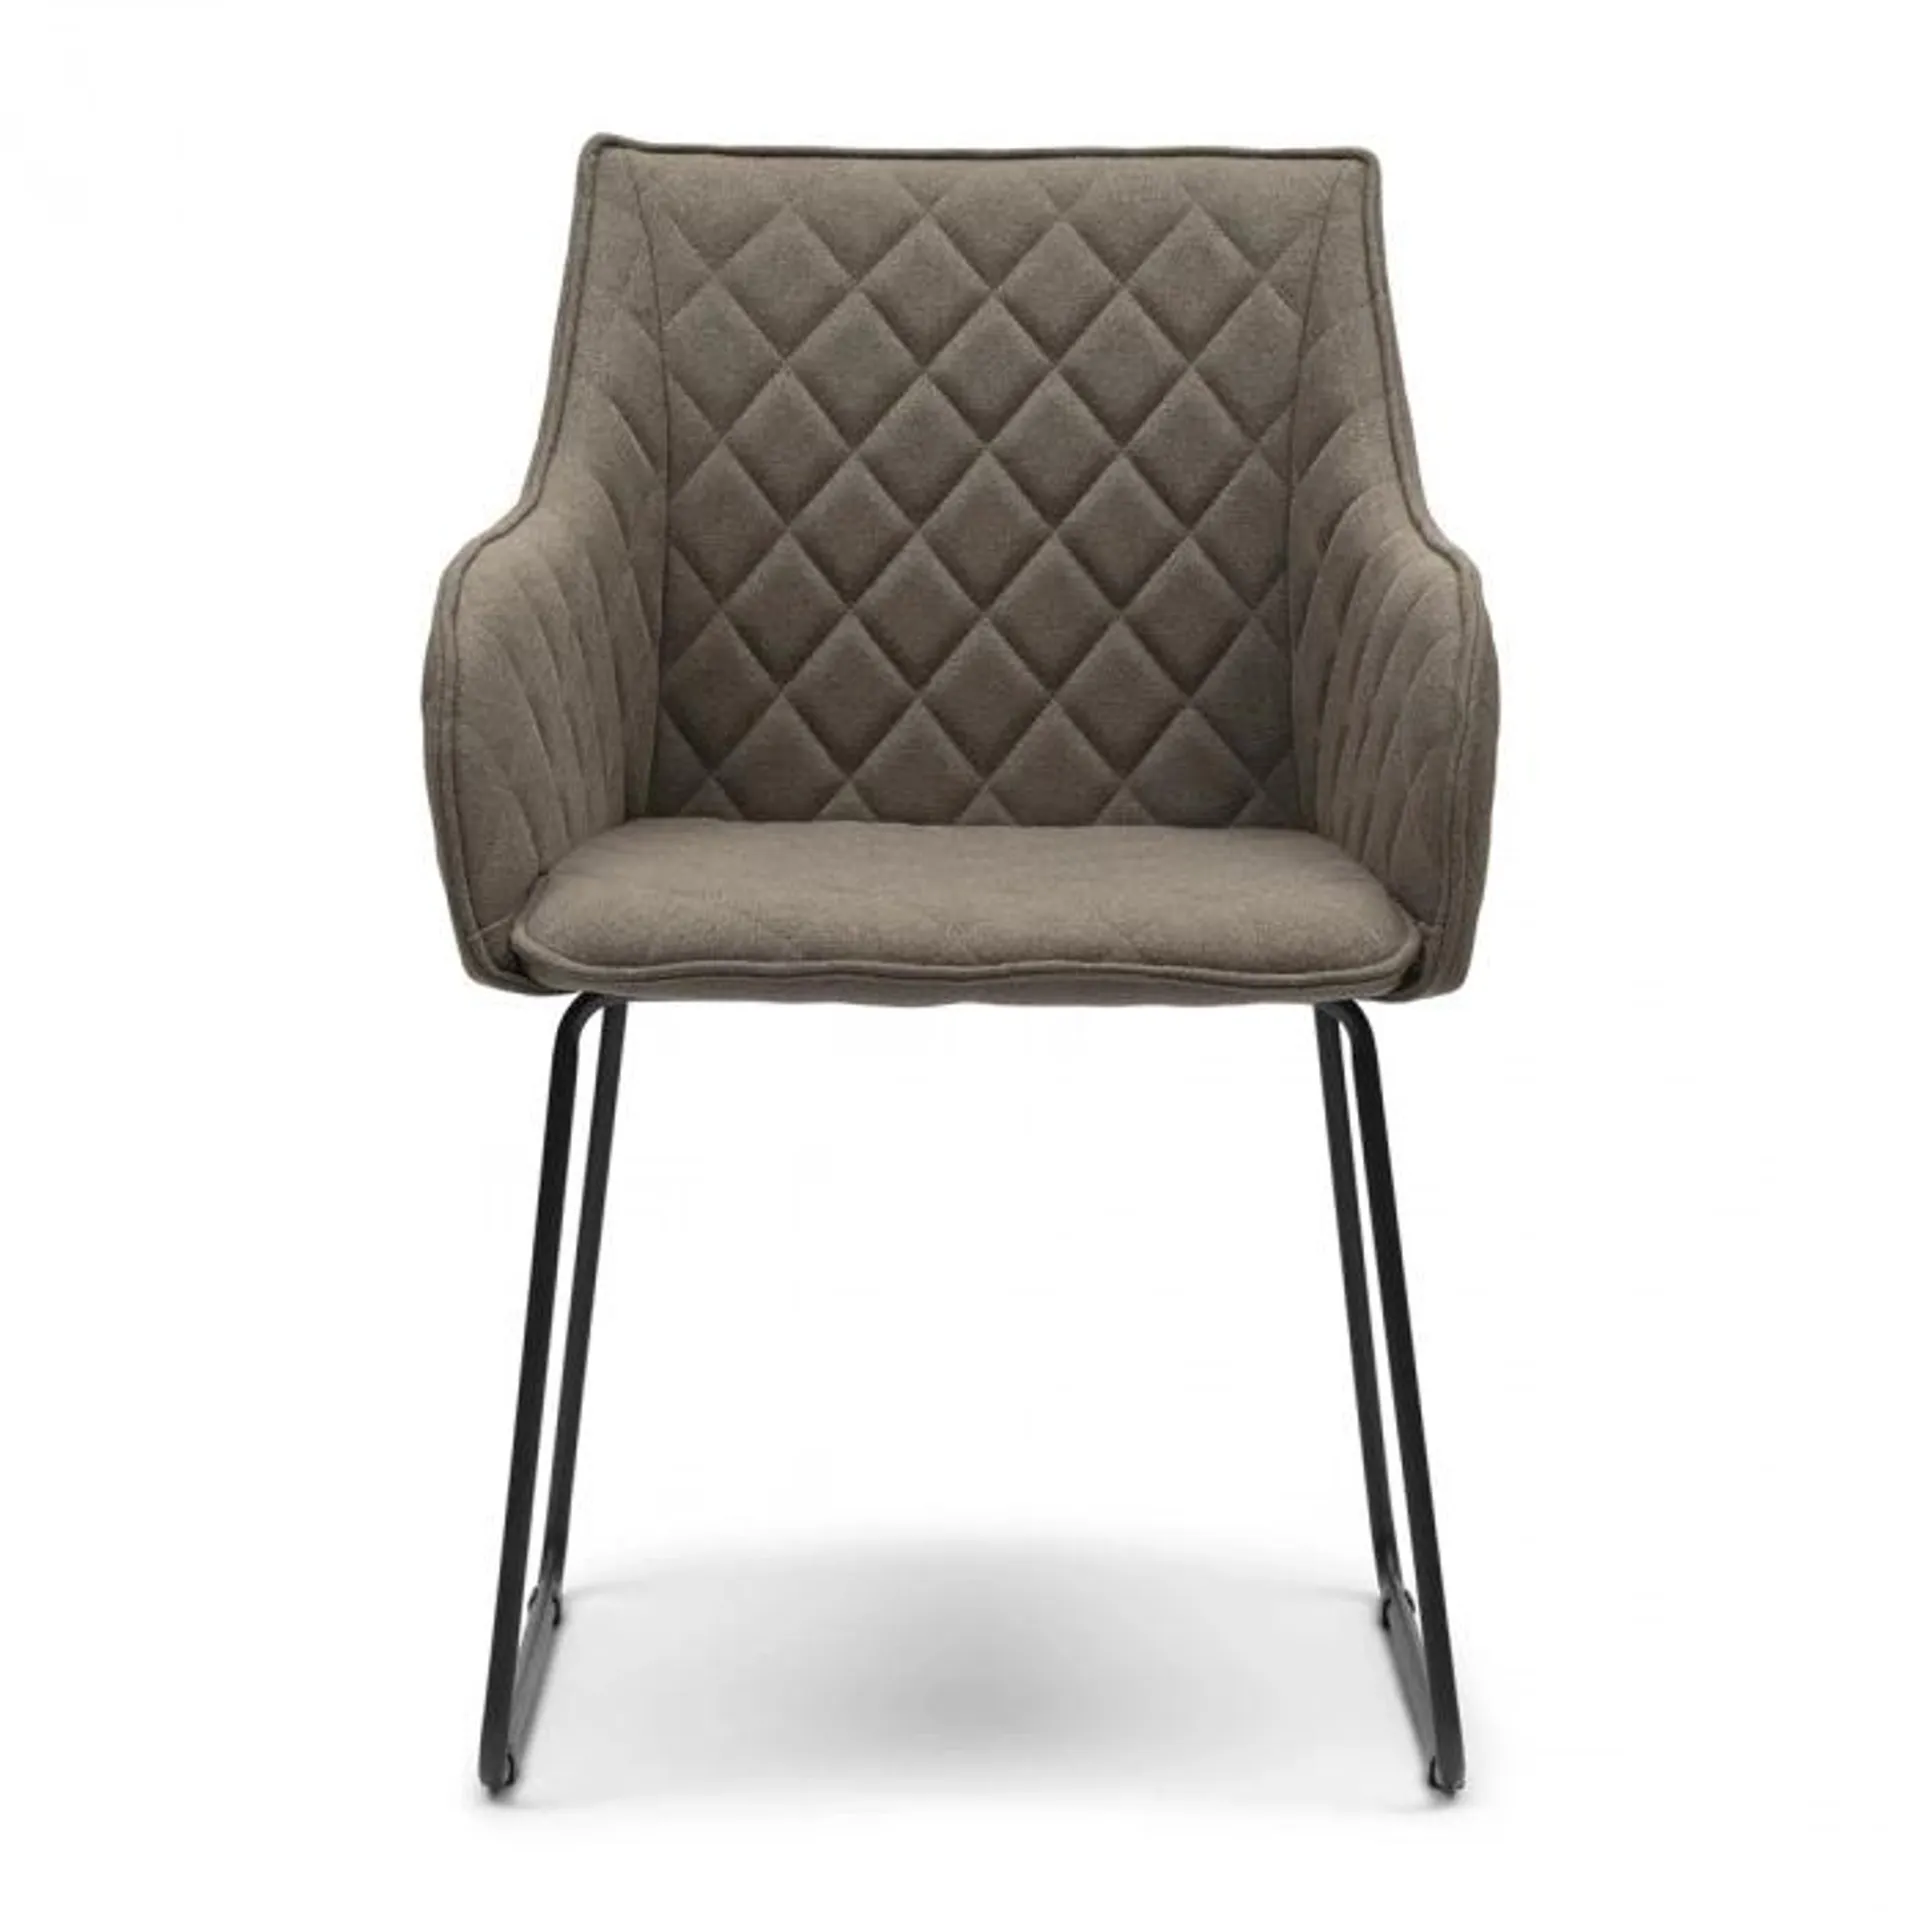 Dining Chair Frisco Drive, Dark Taupe, Belgium Weave